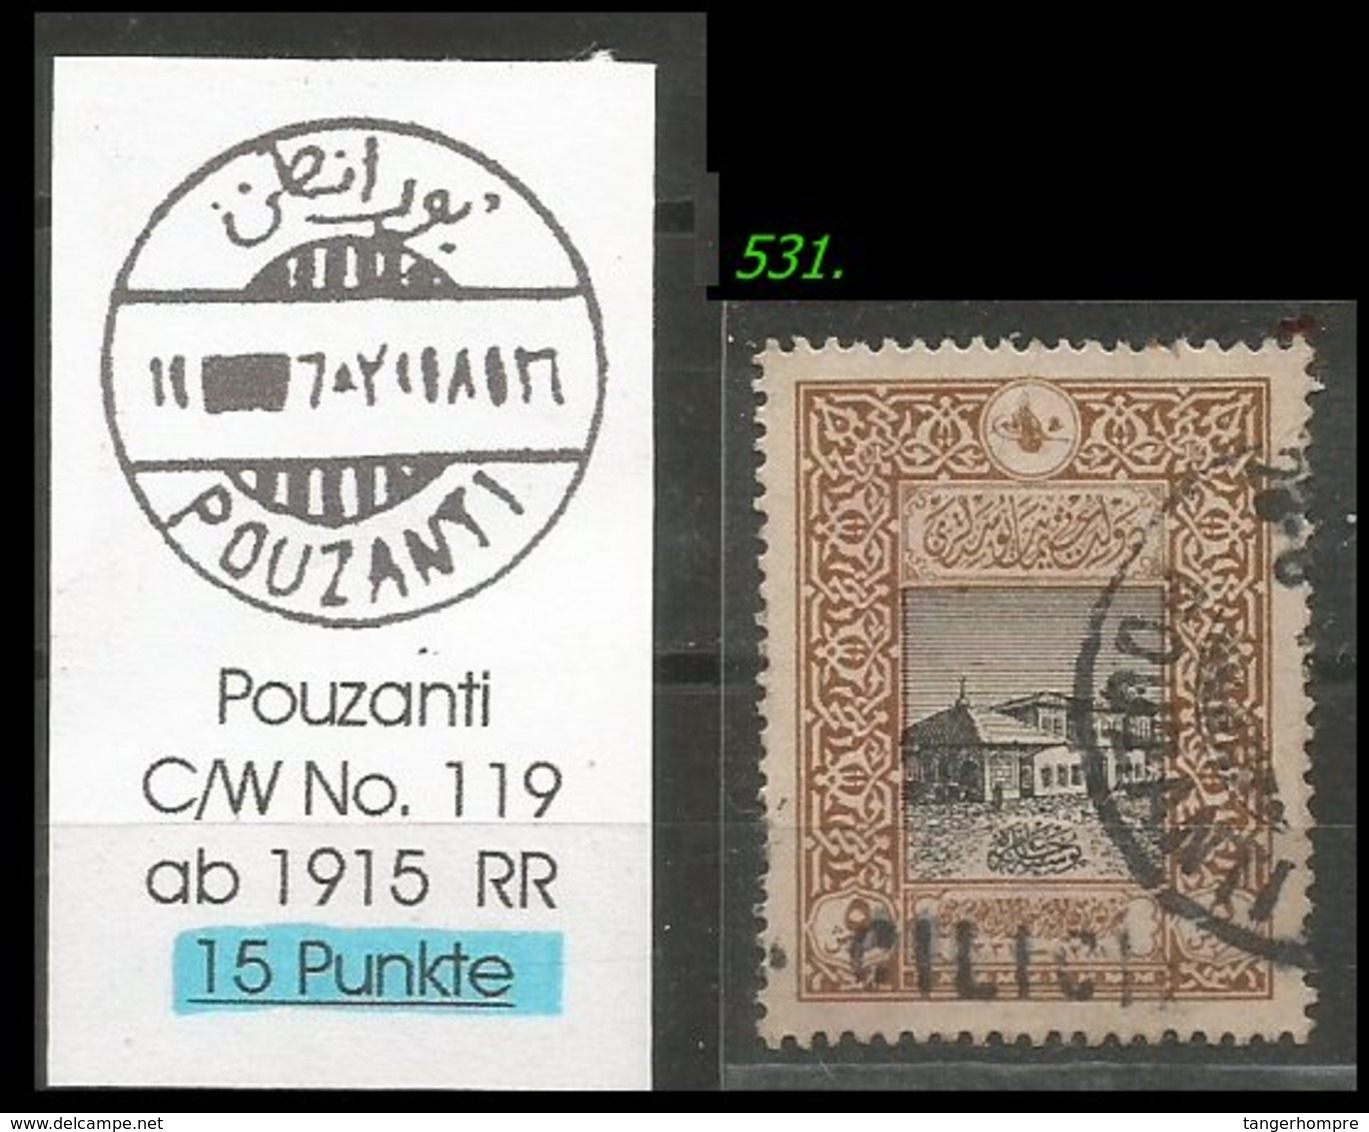 EARLY OTTOMAN SPECIALIZED FOR SPECIALIST, SEE...POUZANTI -RR- - Gebraucht